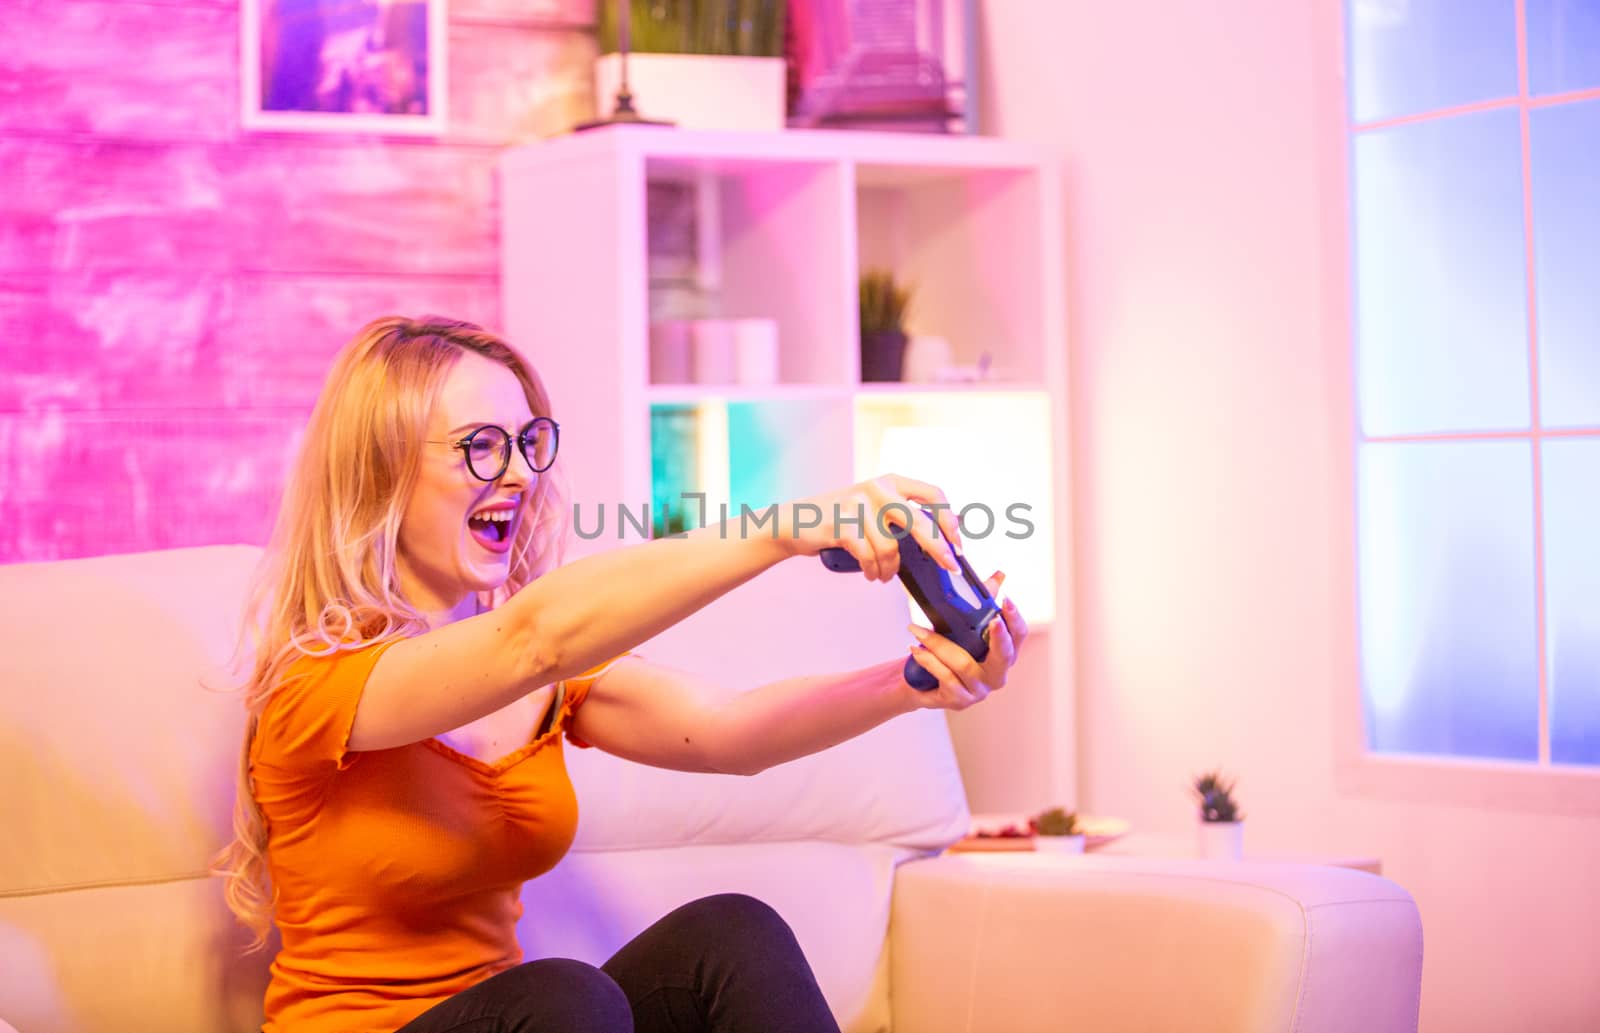 Beautiful blonde girl excited while playing video games using wireless controllers. Cheerful girl playing video games.